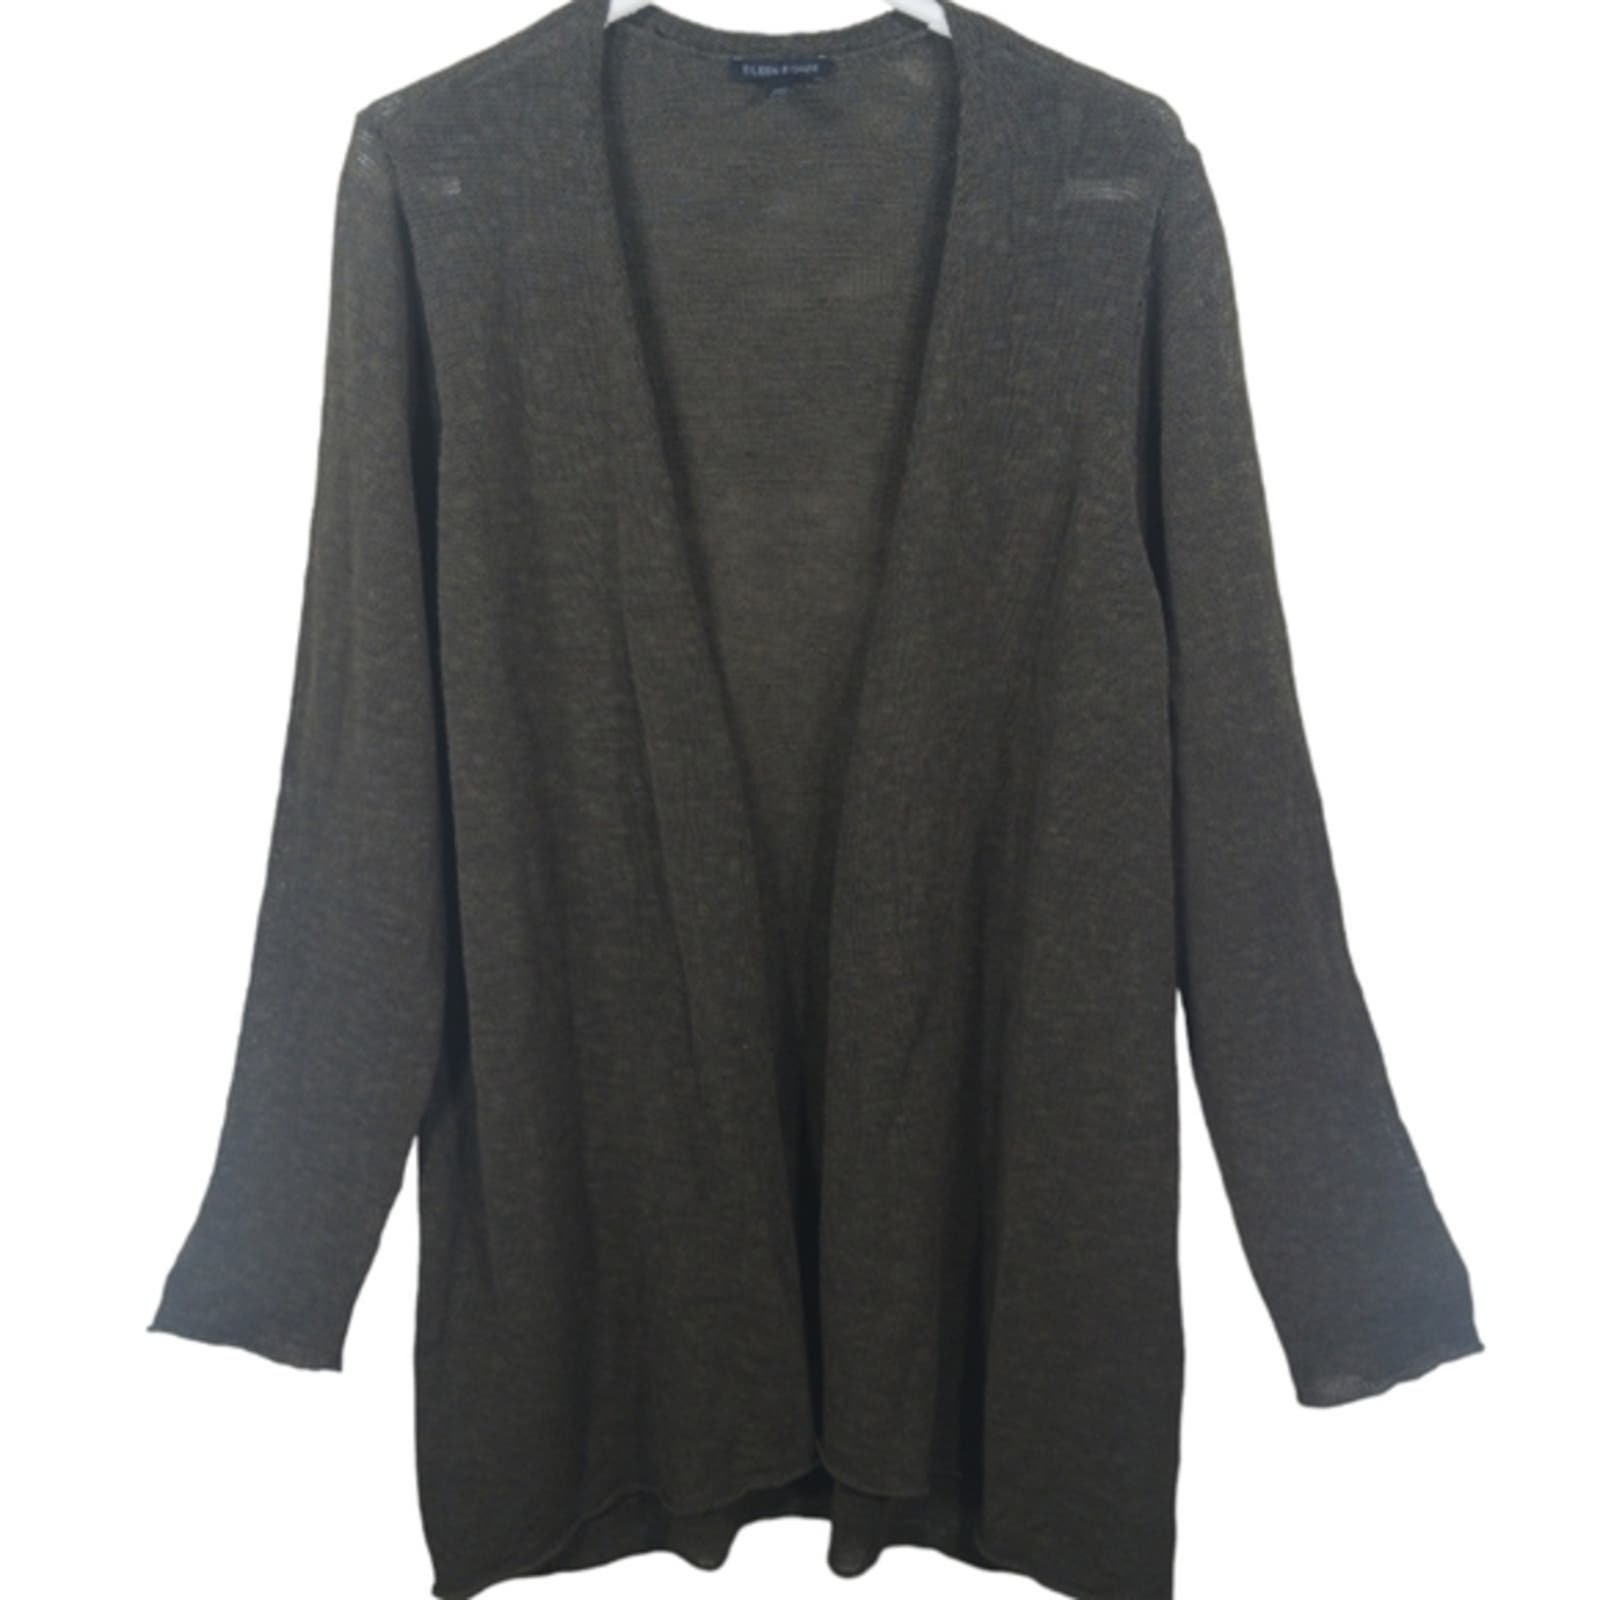 the Lowest price WF121 GUC $248 Eileen Fisher Organic C